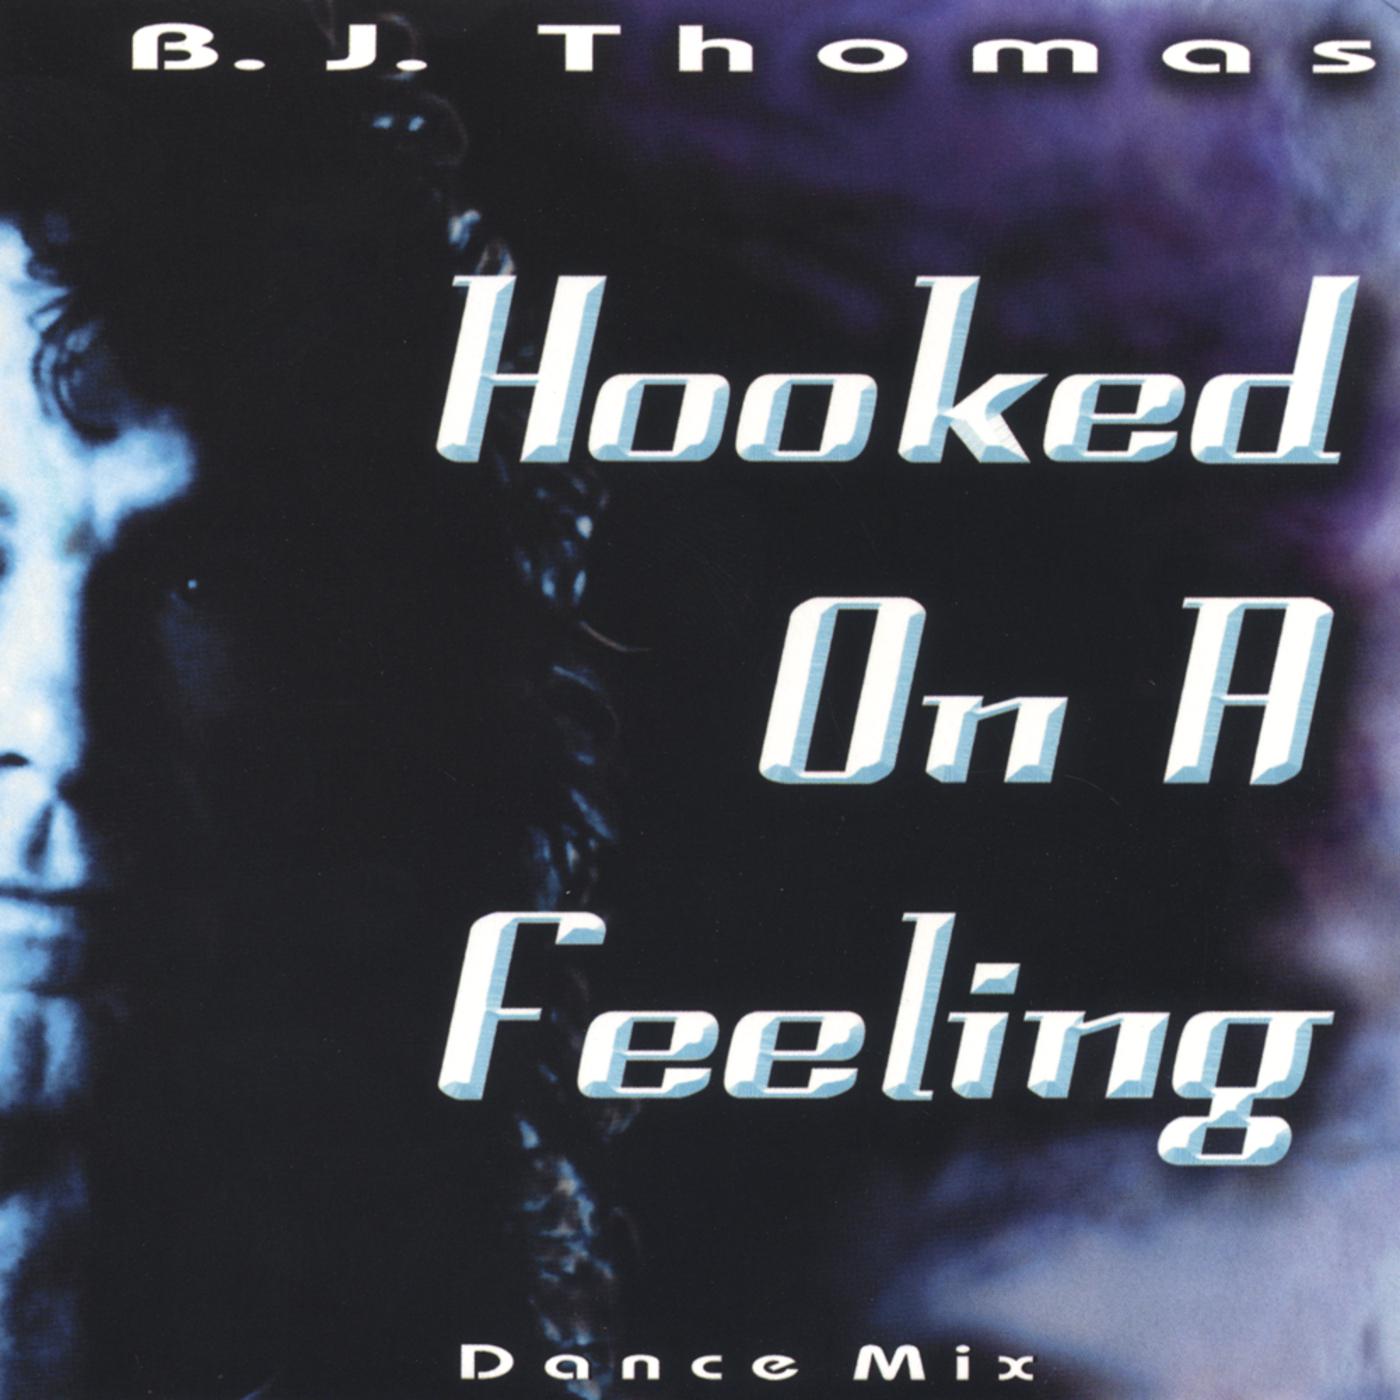 Hooked on a Feeling Dance Mix